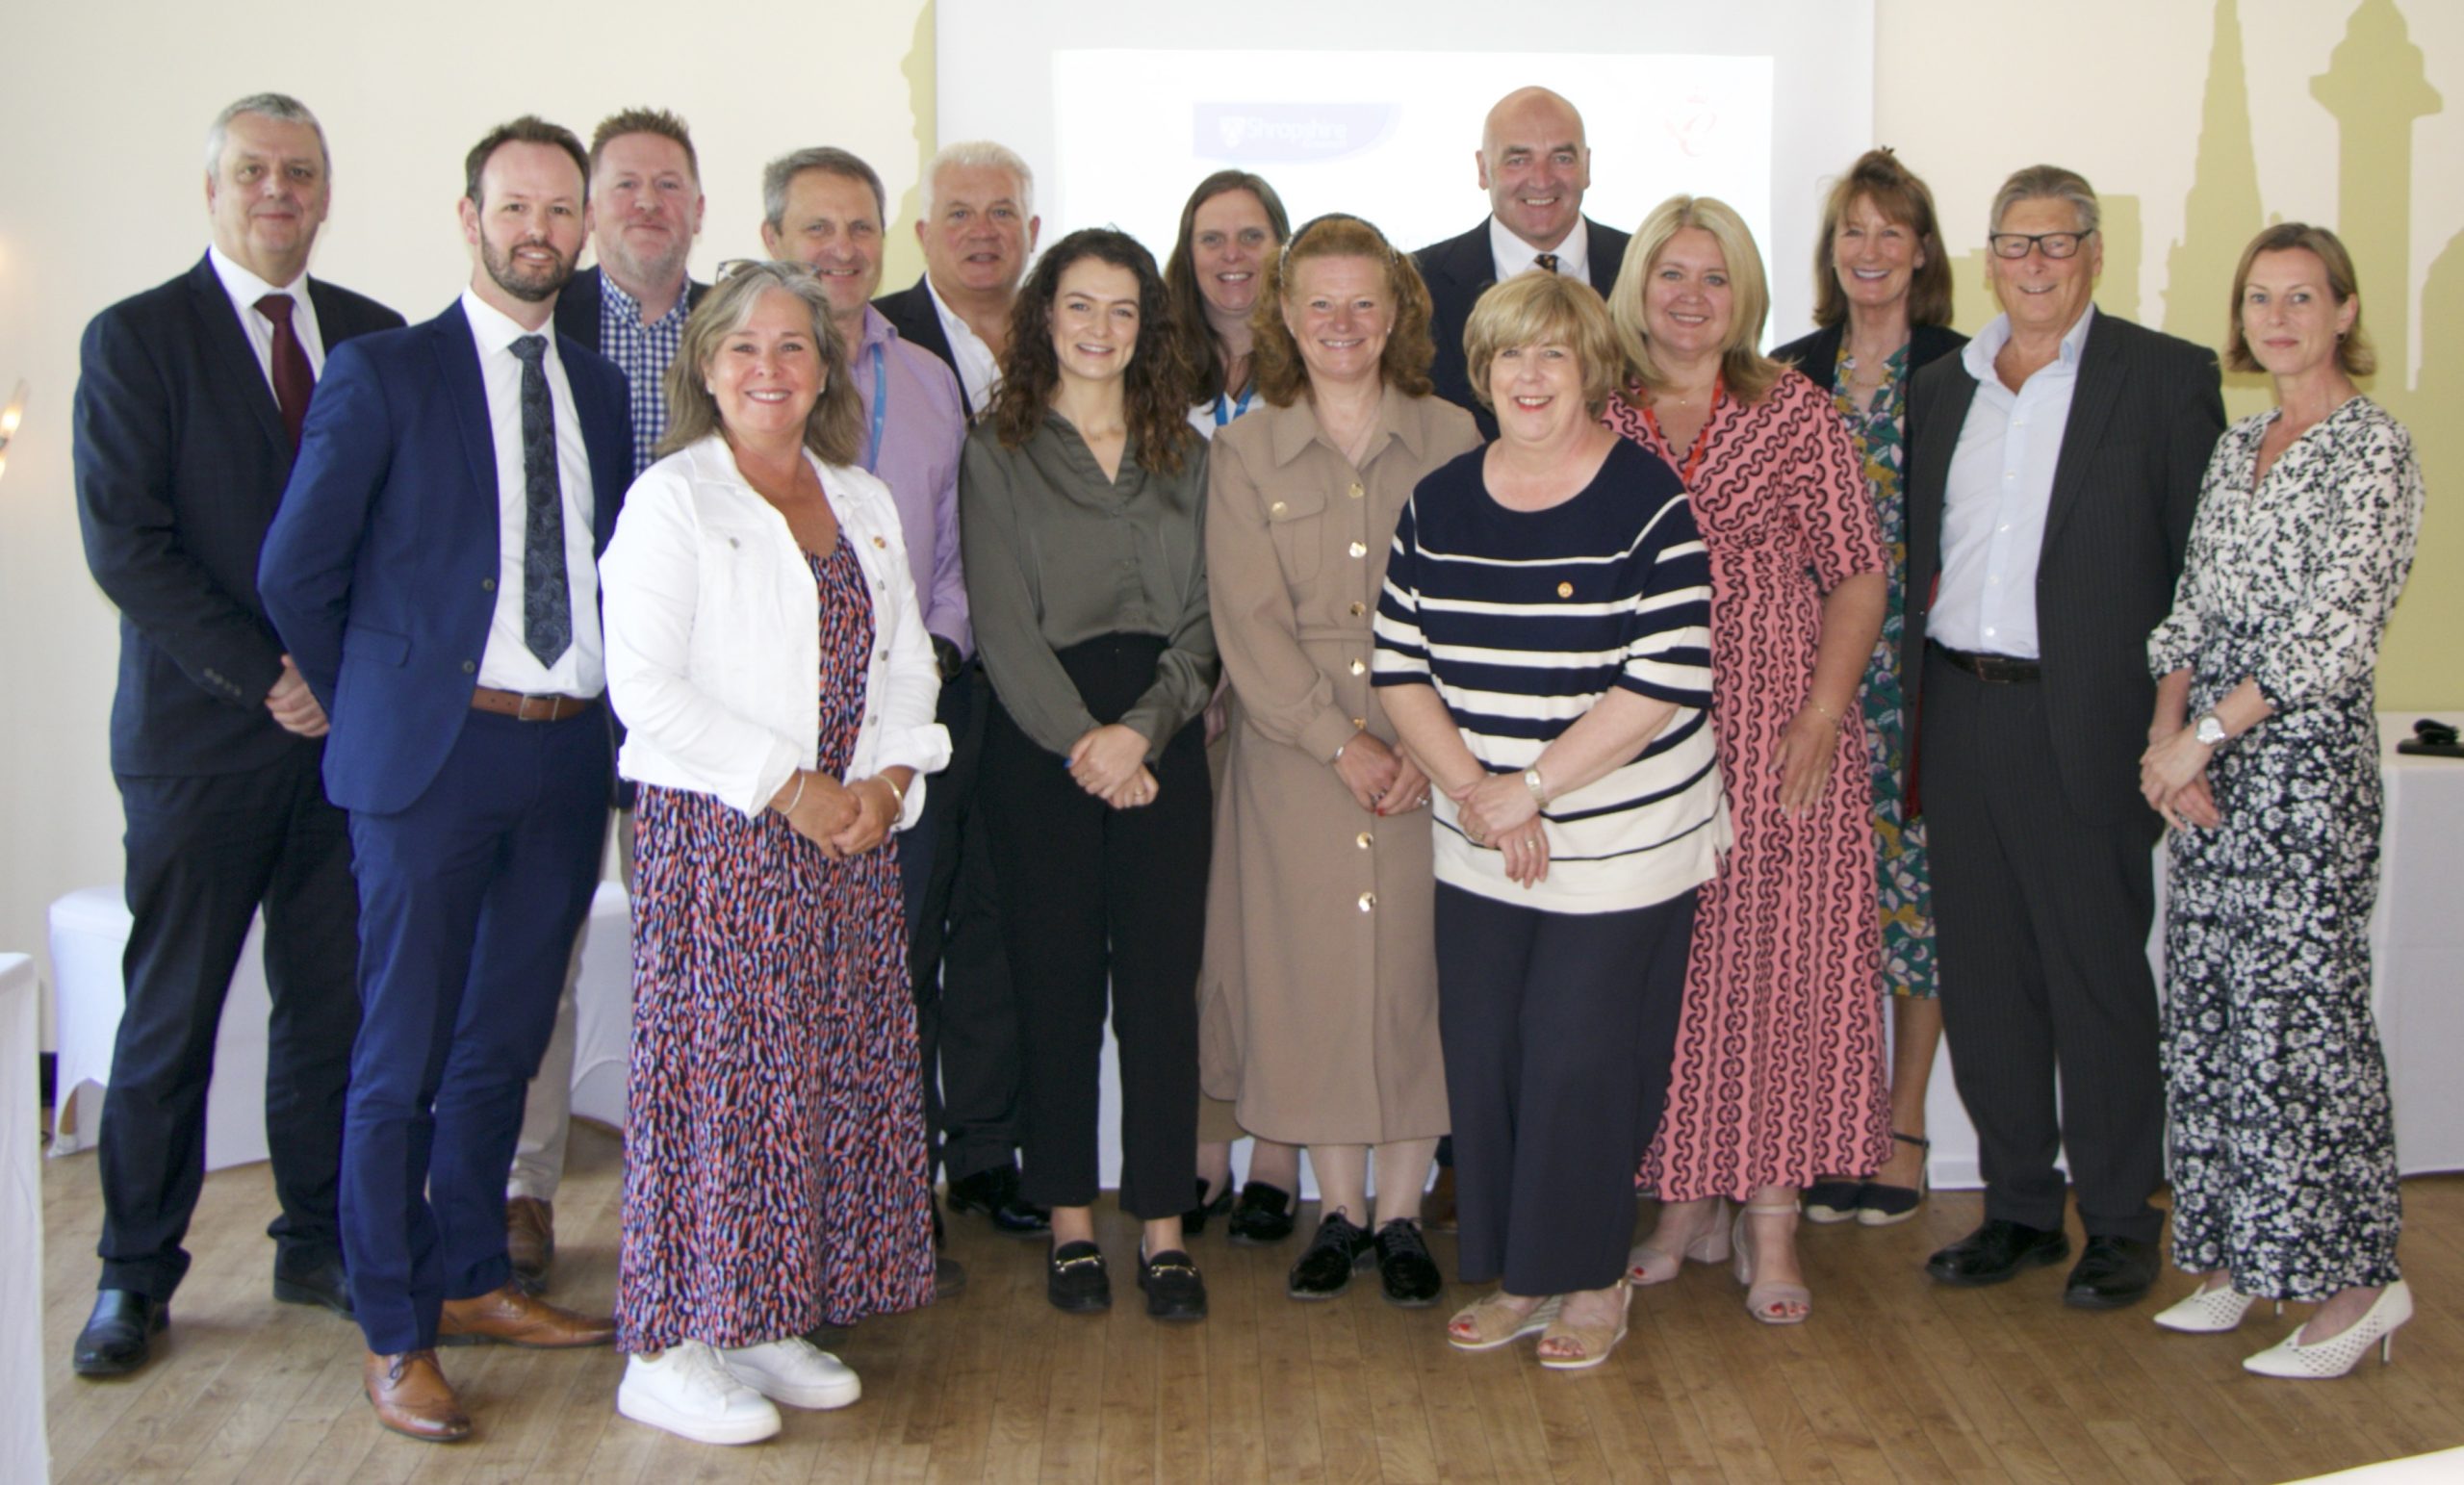 News from our partners: Events encourage Shropshire’s ‘wonderful’ firms to seek royal approval